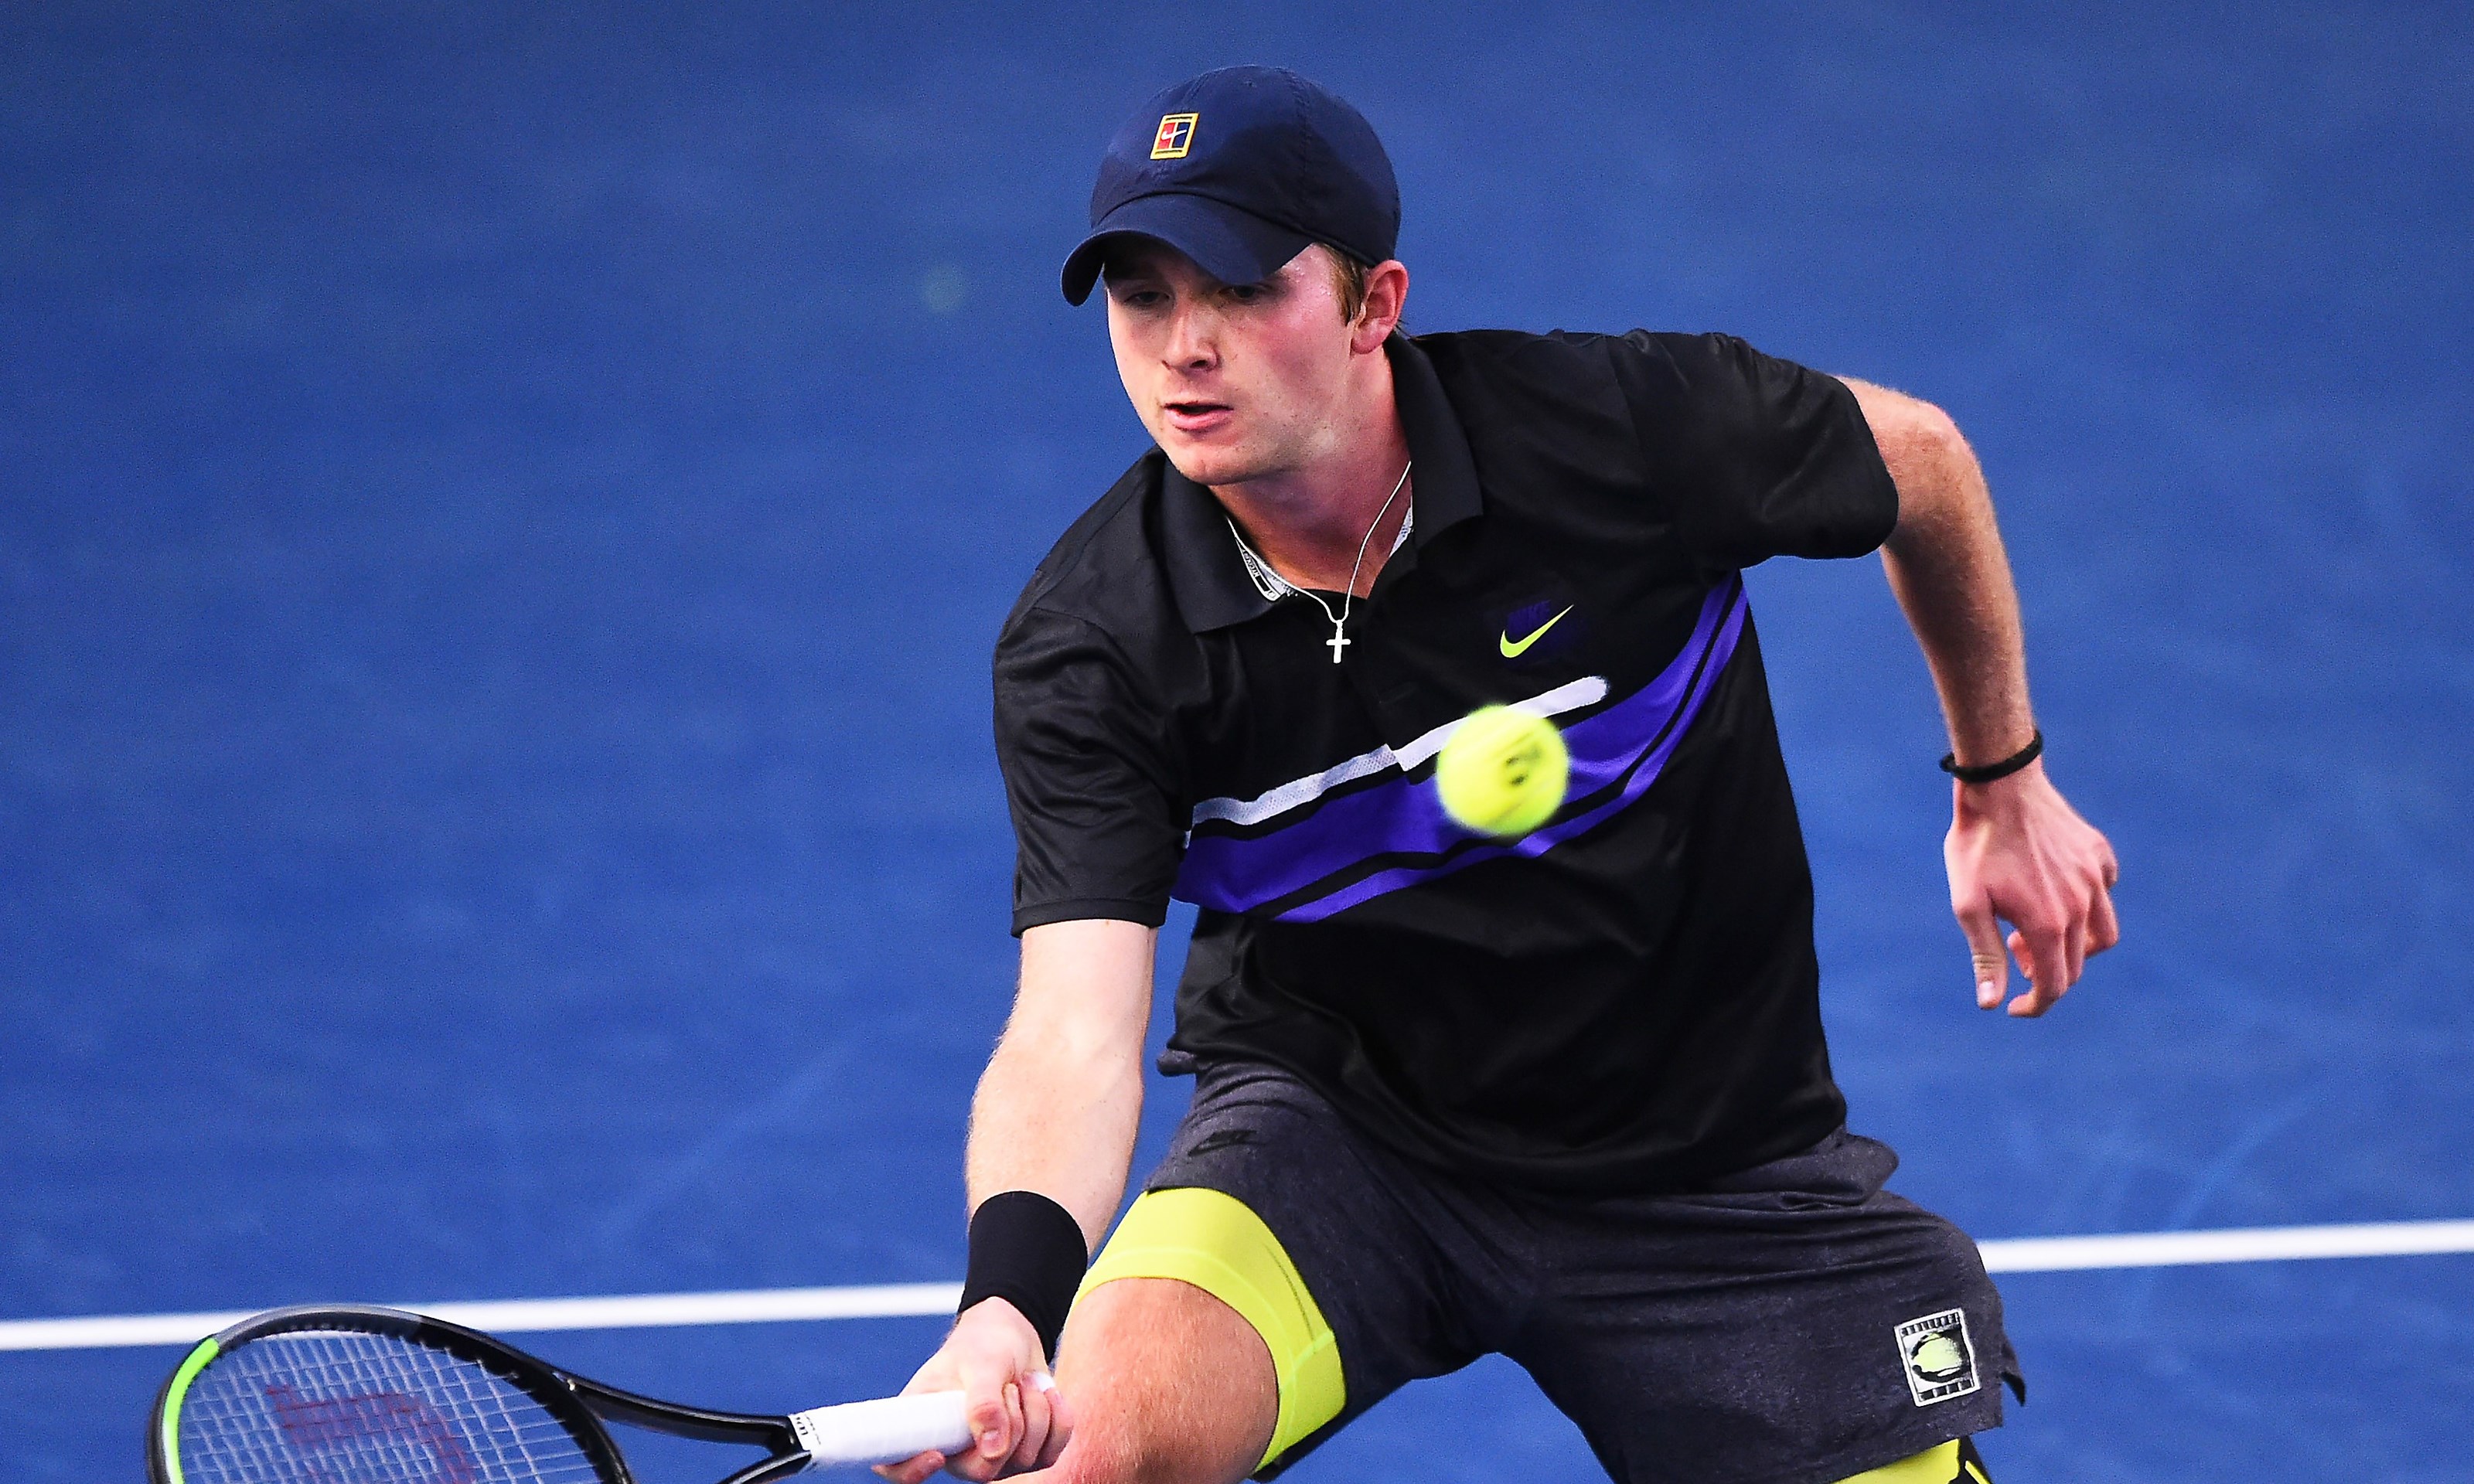 Aidan McHugh plays a forehand shot during their round robin match against Jack Pinnington Jones during Day Four of the Battle of the Brits Premier League of Tennis at the National Tennis Centre on 23 December 2020.